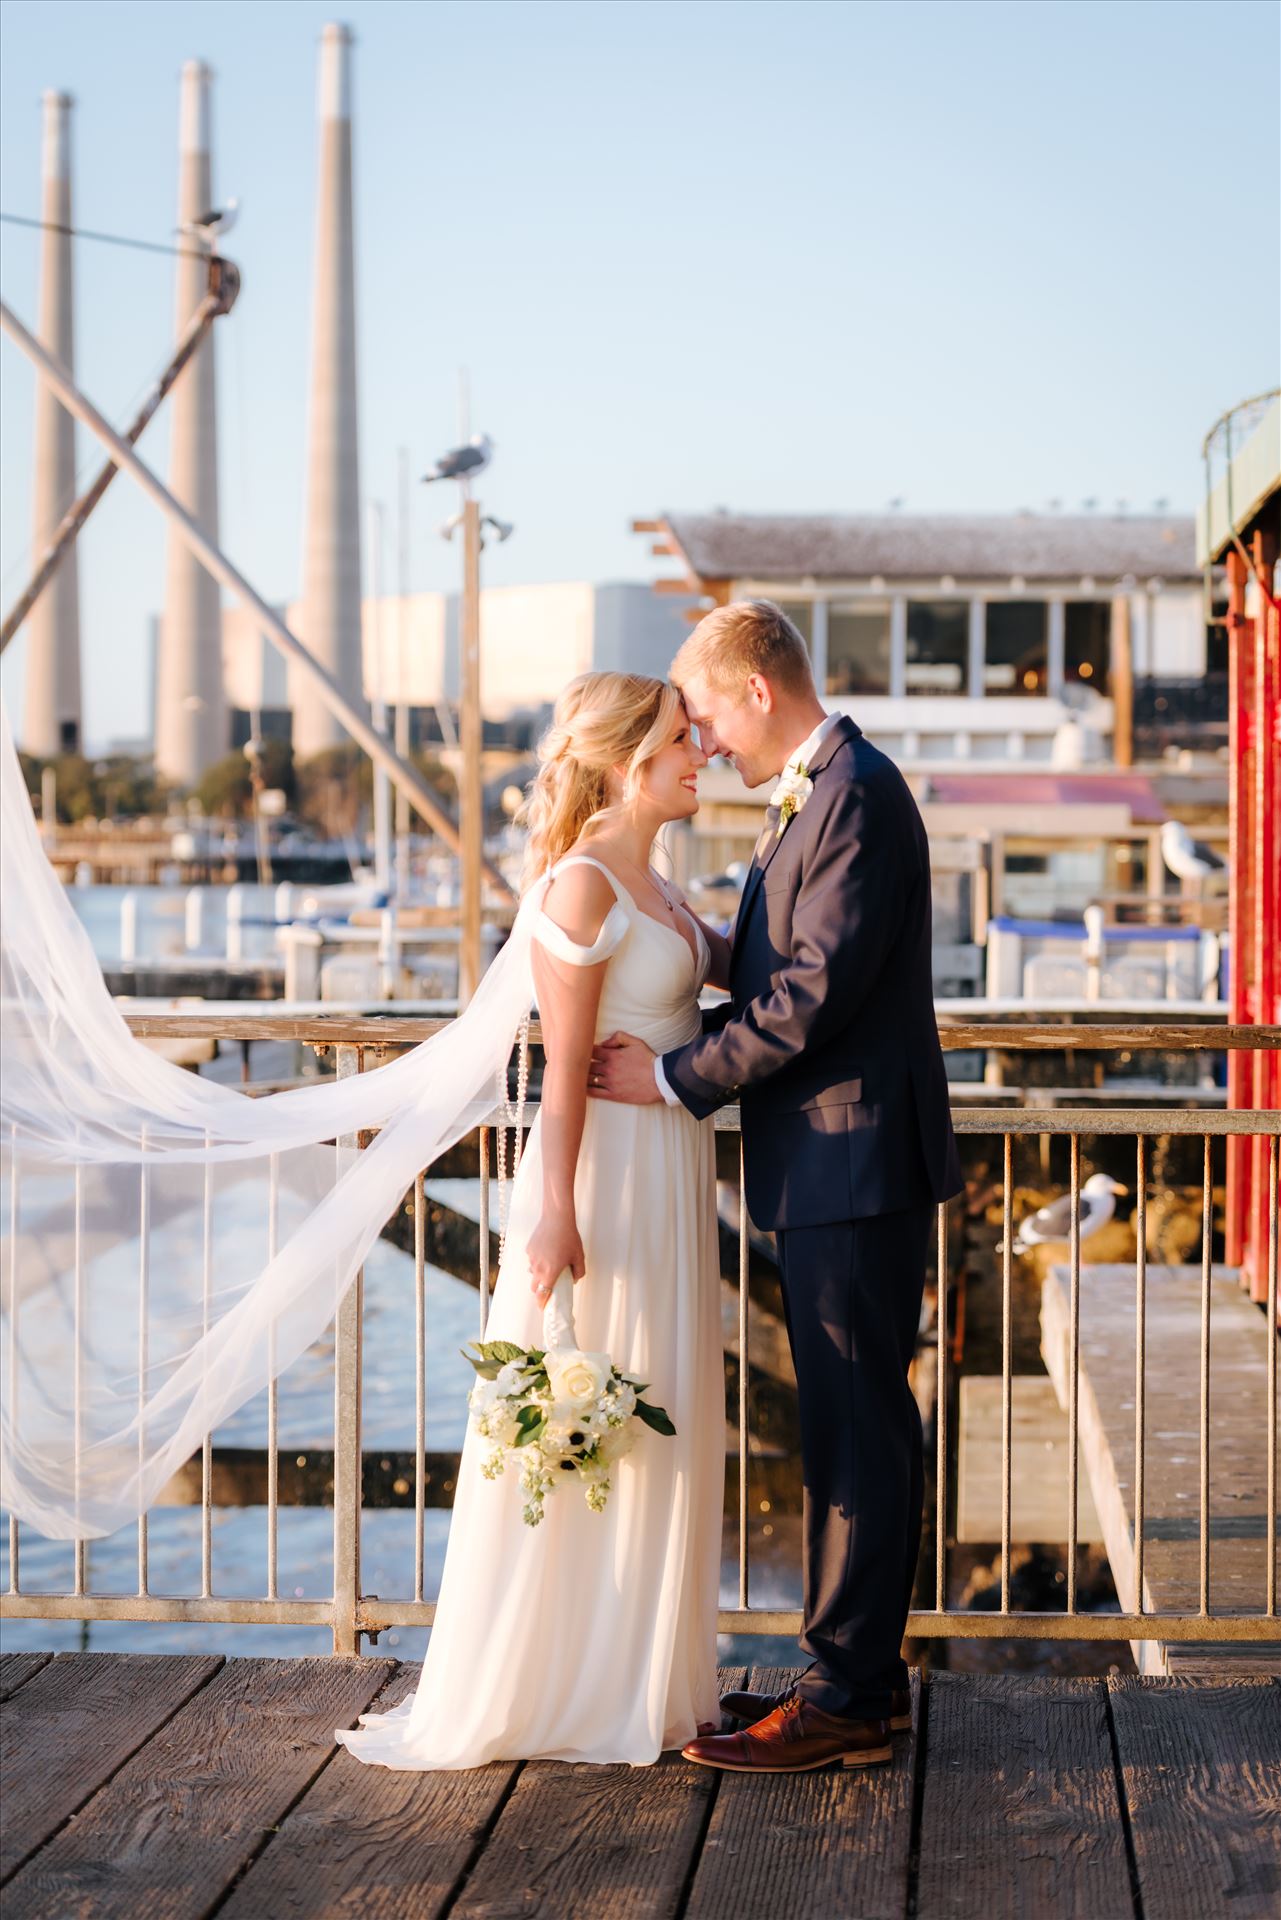 FW-8272.JPG - Sarah Williams of Mirror's Edge Photography, a San Luis Obispo Wedding and Engagement Photographer, captures Ryan and Joanna's wedding at the iconic Windows on the Water Restaurant in Morro Bay, California.  Bride and Groom with bay in background. by Sarah Williams